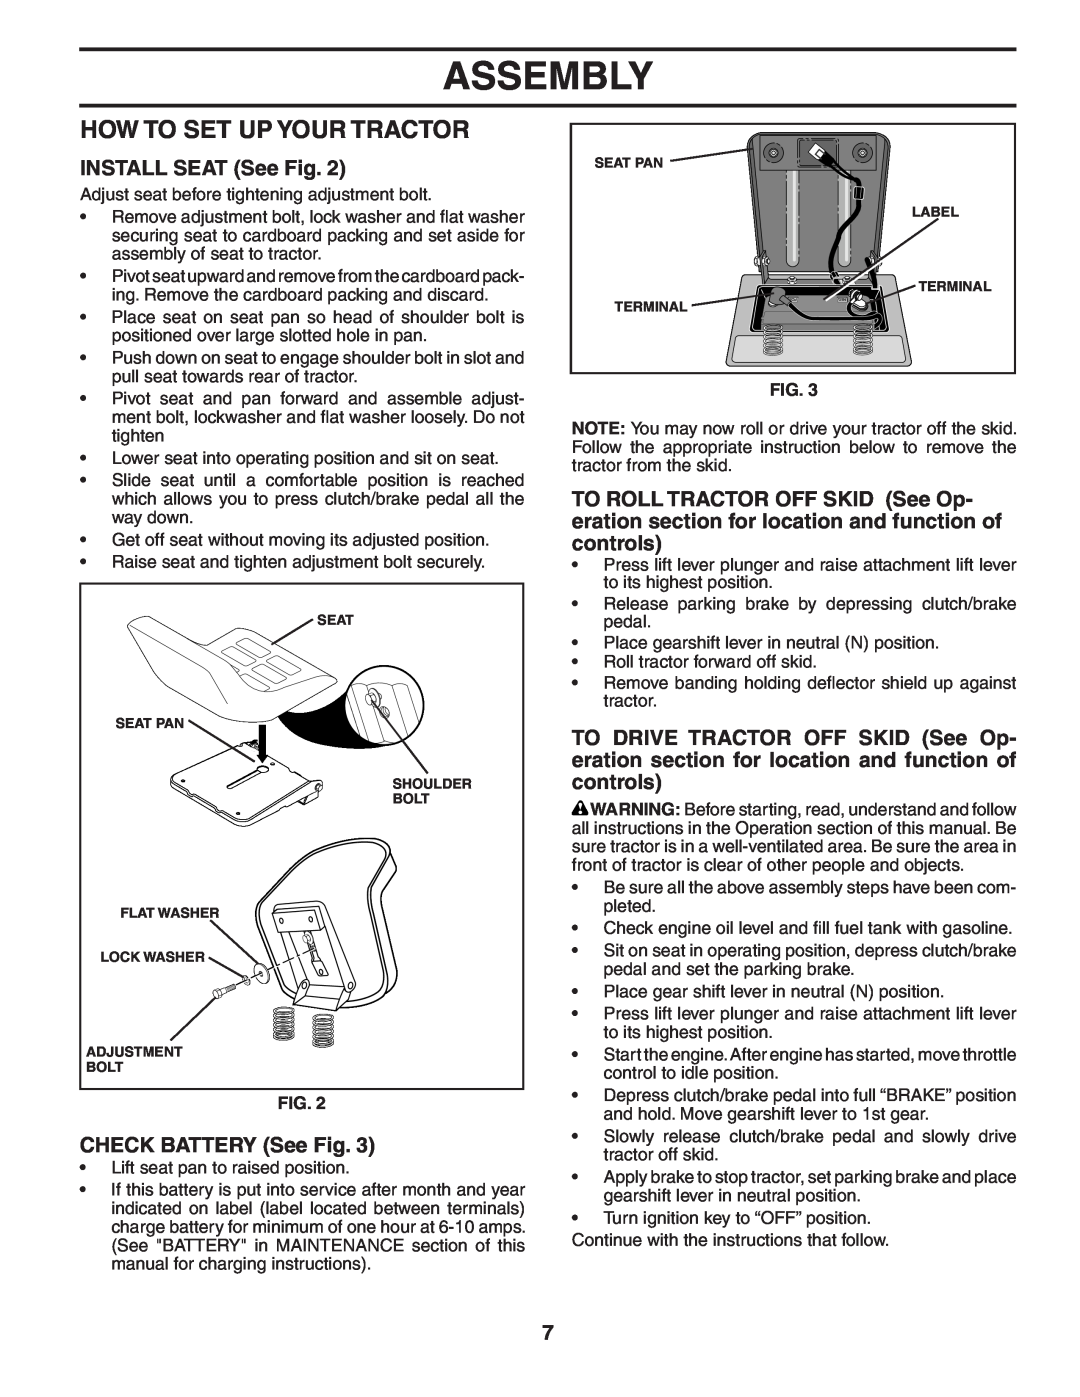 Weed Eater WE165T42A manual How To Set Up Your Tractor, INSTALL SEAT See Fig, CHECK BATTERY See Fig, Assembly 